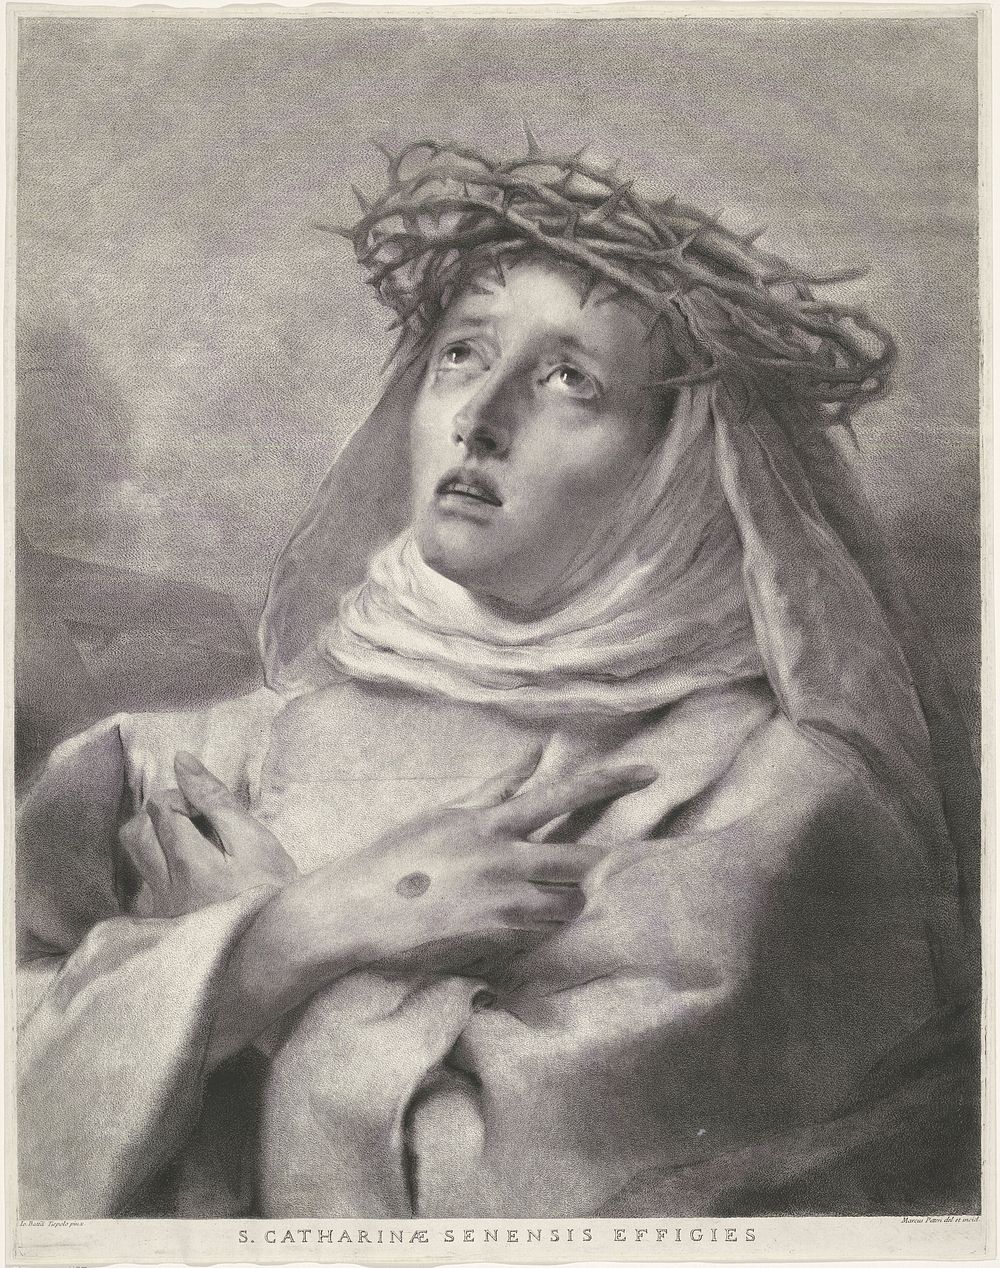 St Catherine of Siena (c. 1750) by Giovanni Marco Pitteri, Giovanni Marco Pitteri and Giovanni Battista Tiepolo